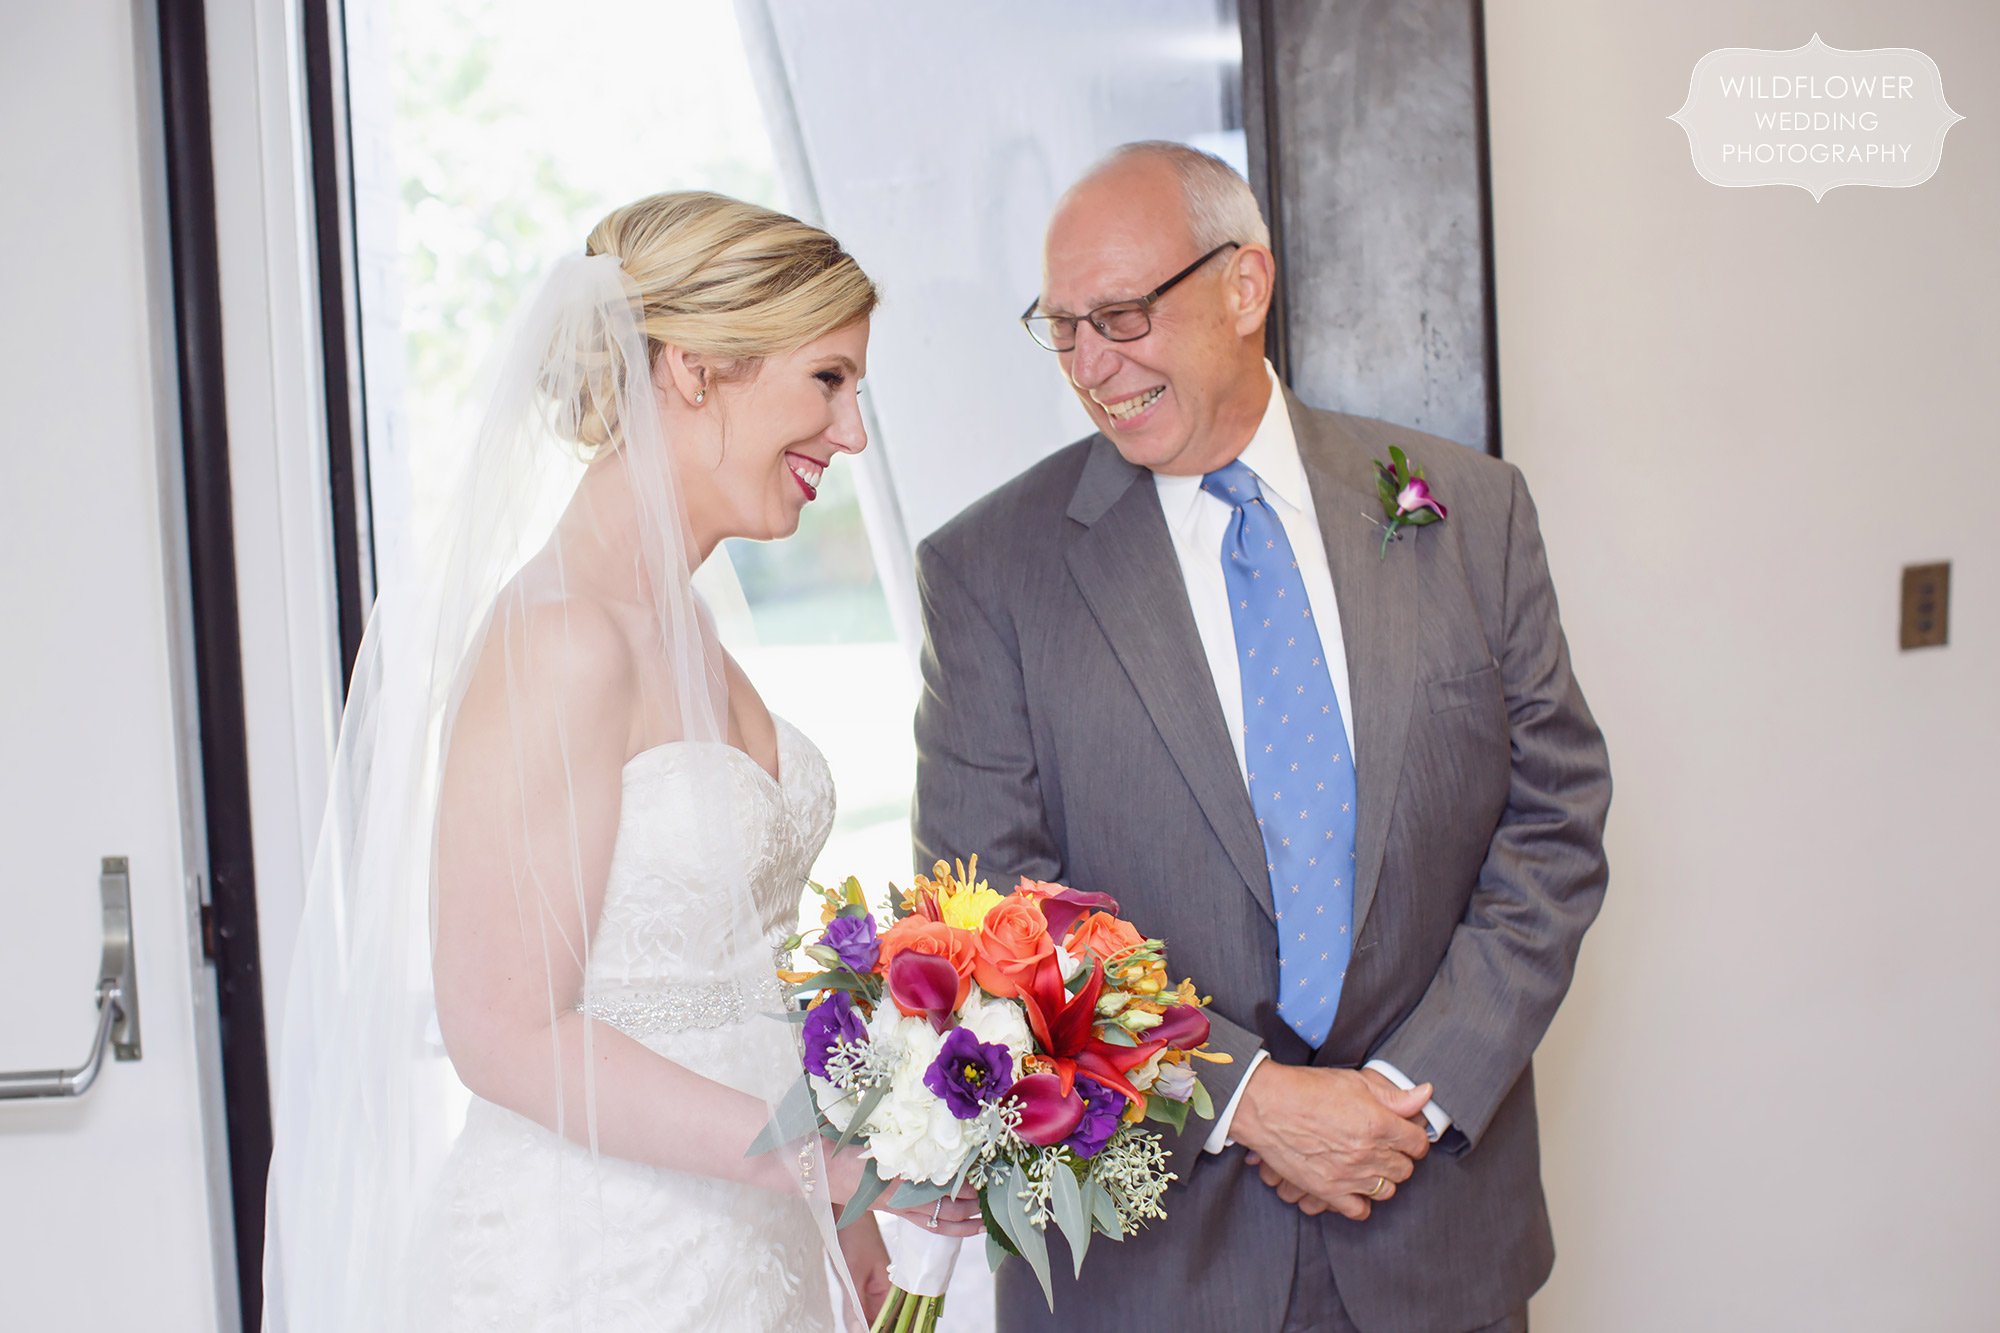 The bride laughs with her dad before her St. Anselm parish wedding in St. Louis.